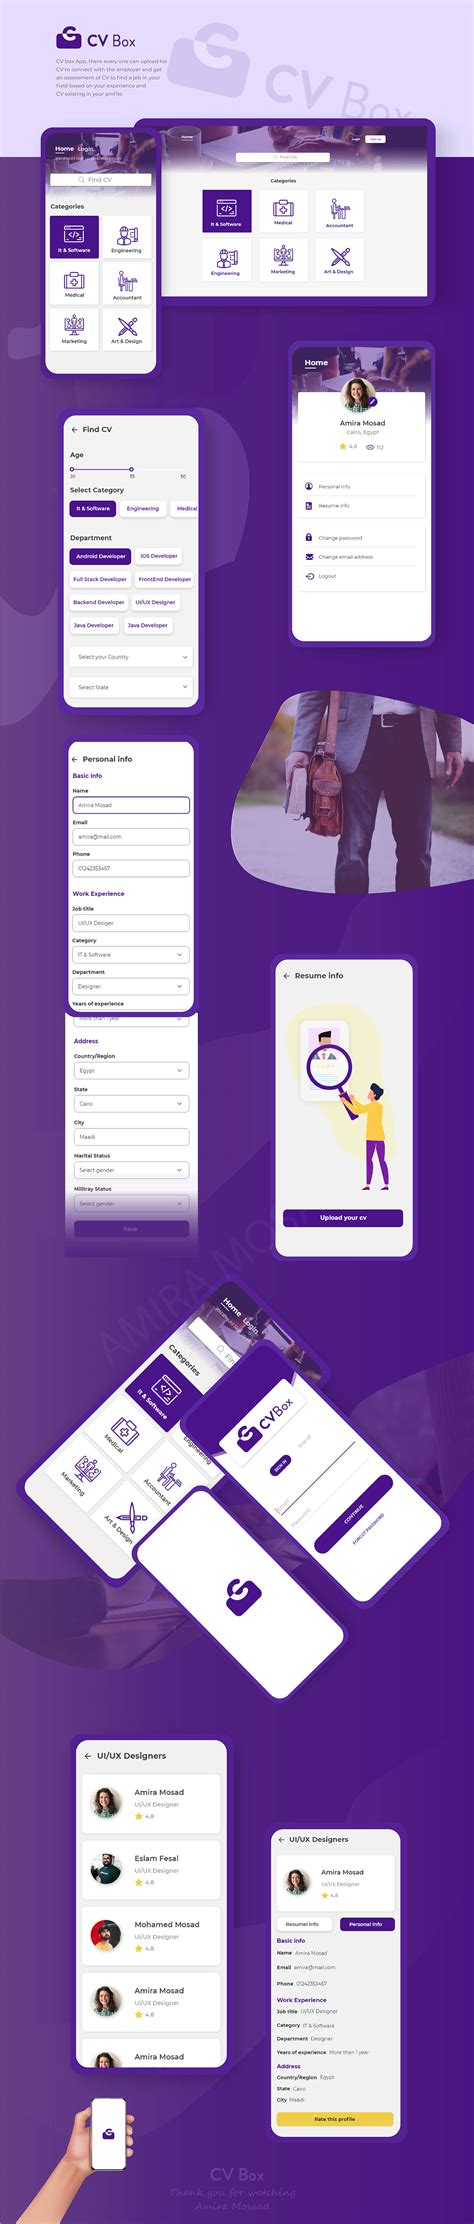 Today, we are sharing 50 free resume (cv templates) in photoshop psd, illustrator ai, indesign indd format, sketch app and and xd format. CV BOX APP Download Now https://lnkd.in/gc47eMg on Behance